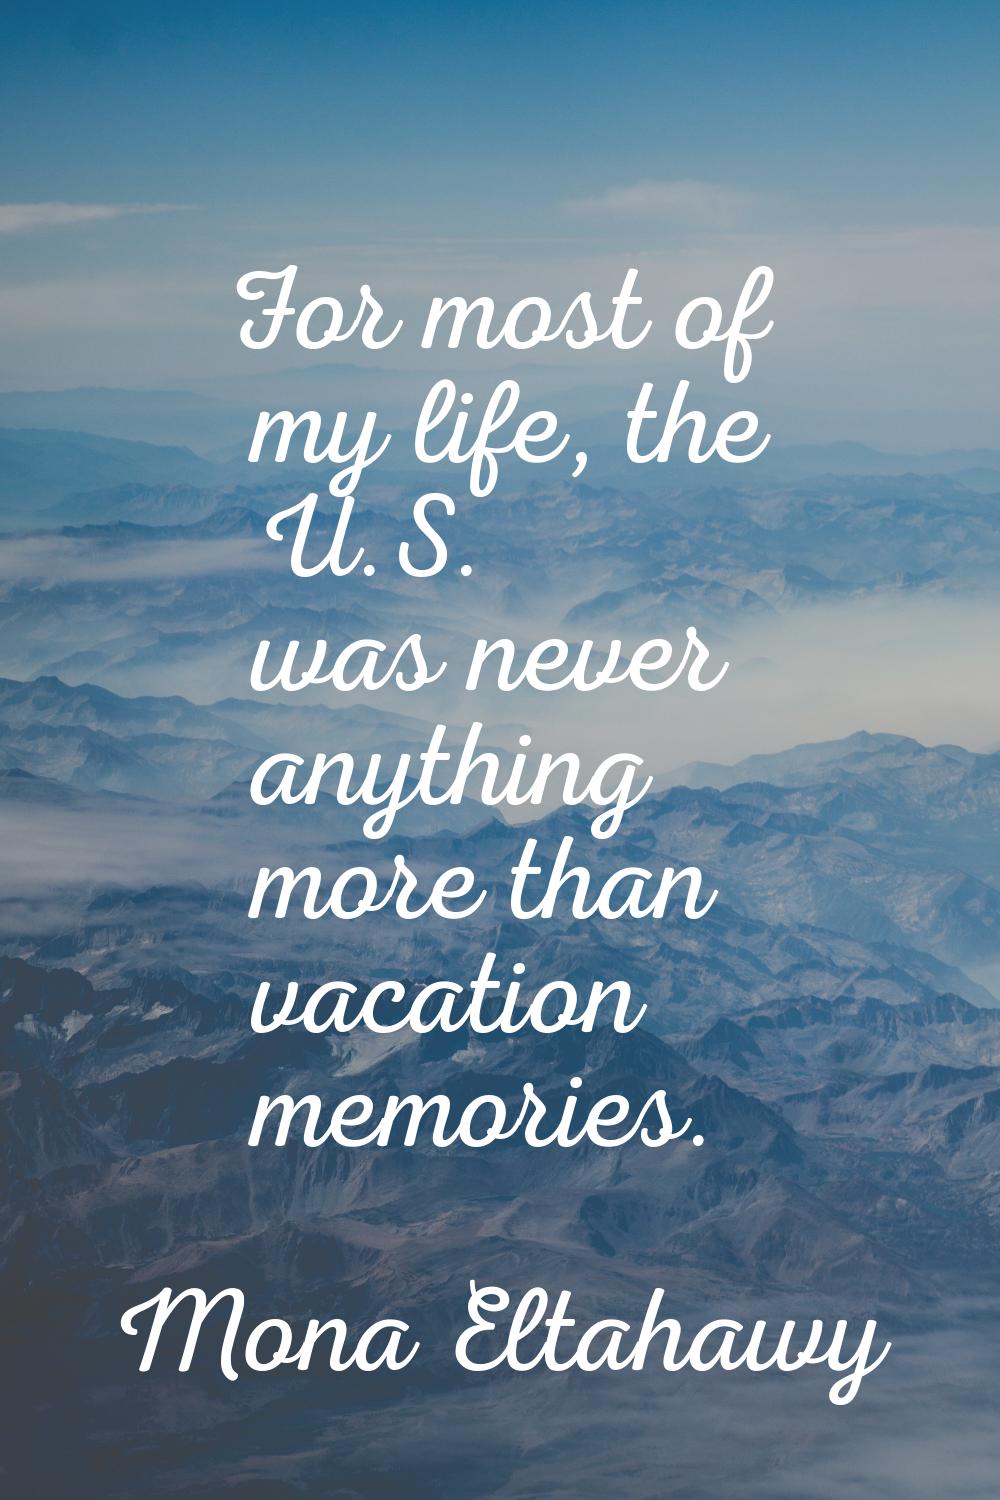 For most of my life, the U.S. was never anything more than vacation memories.